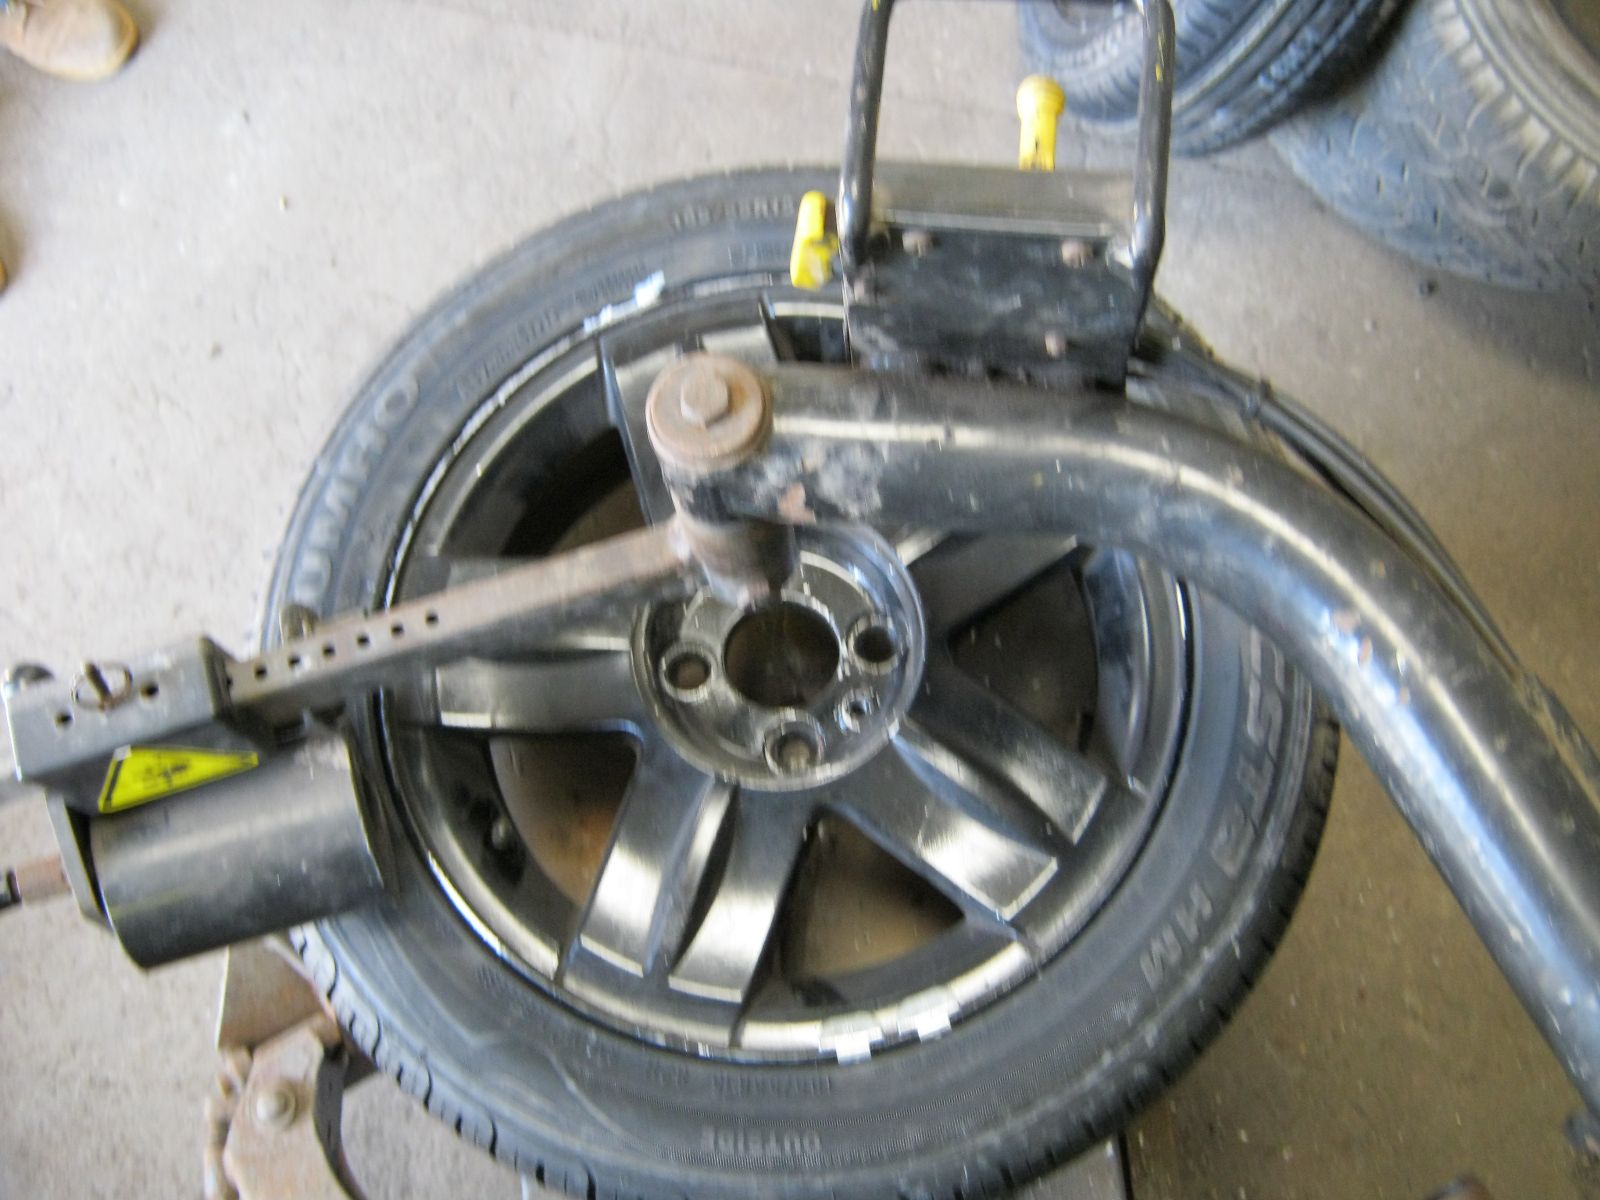 Tyres fitted with new valves & balanced. Tracking also available.